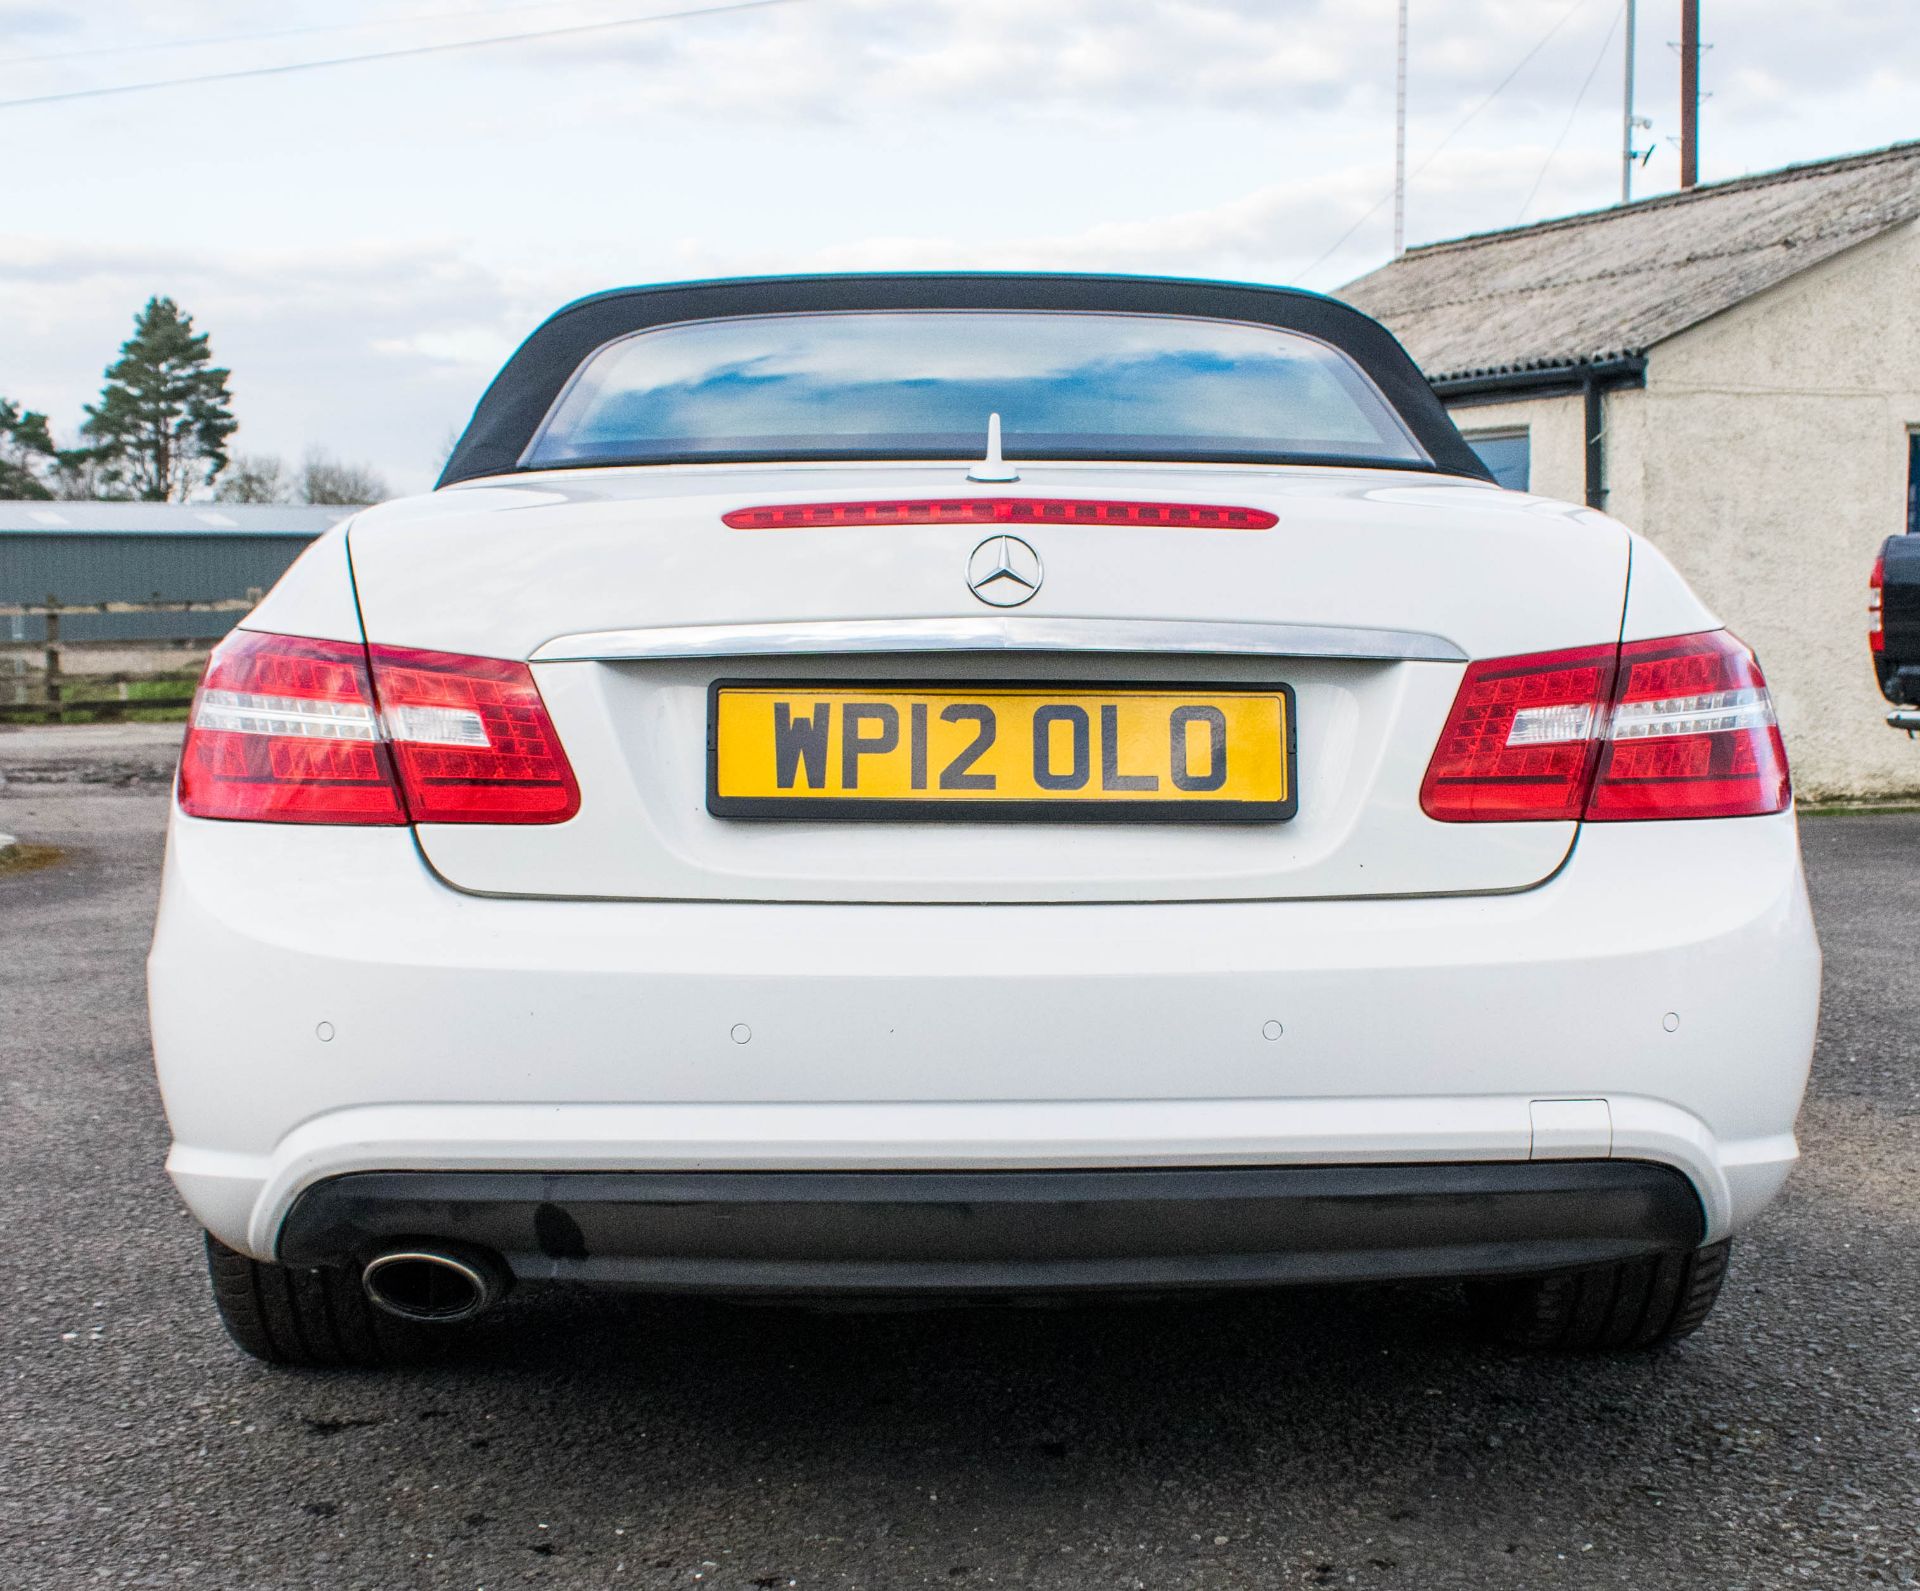 Mercedes Benz E250 sport CDI diesel convertible car Registration number: WP12 OLO Date of - Image 6 of 20